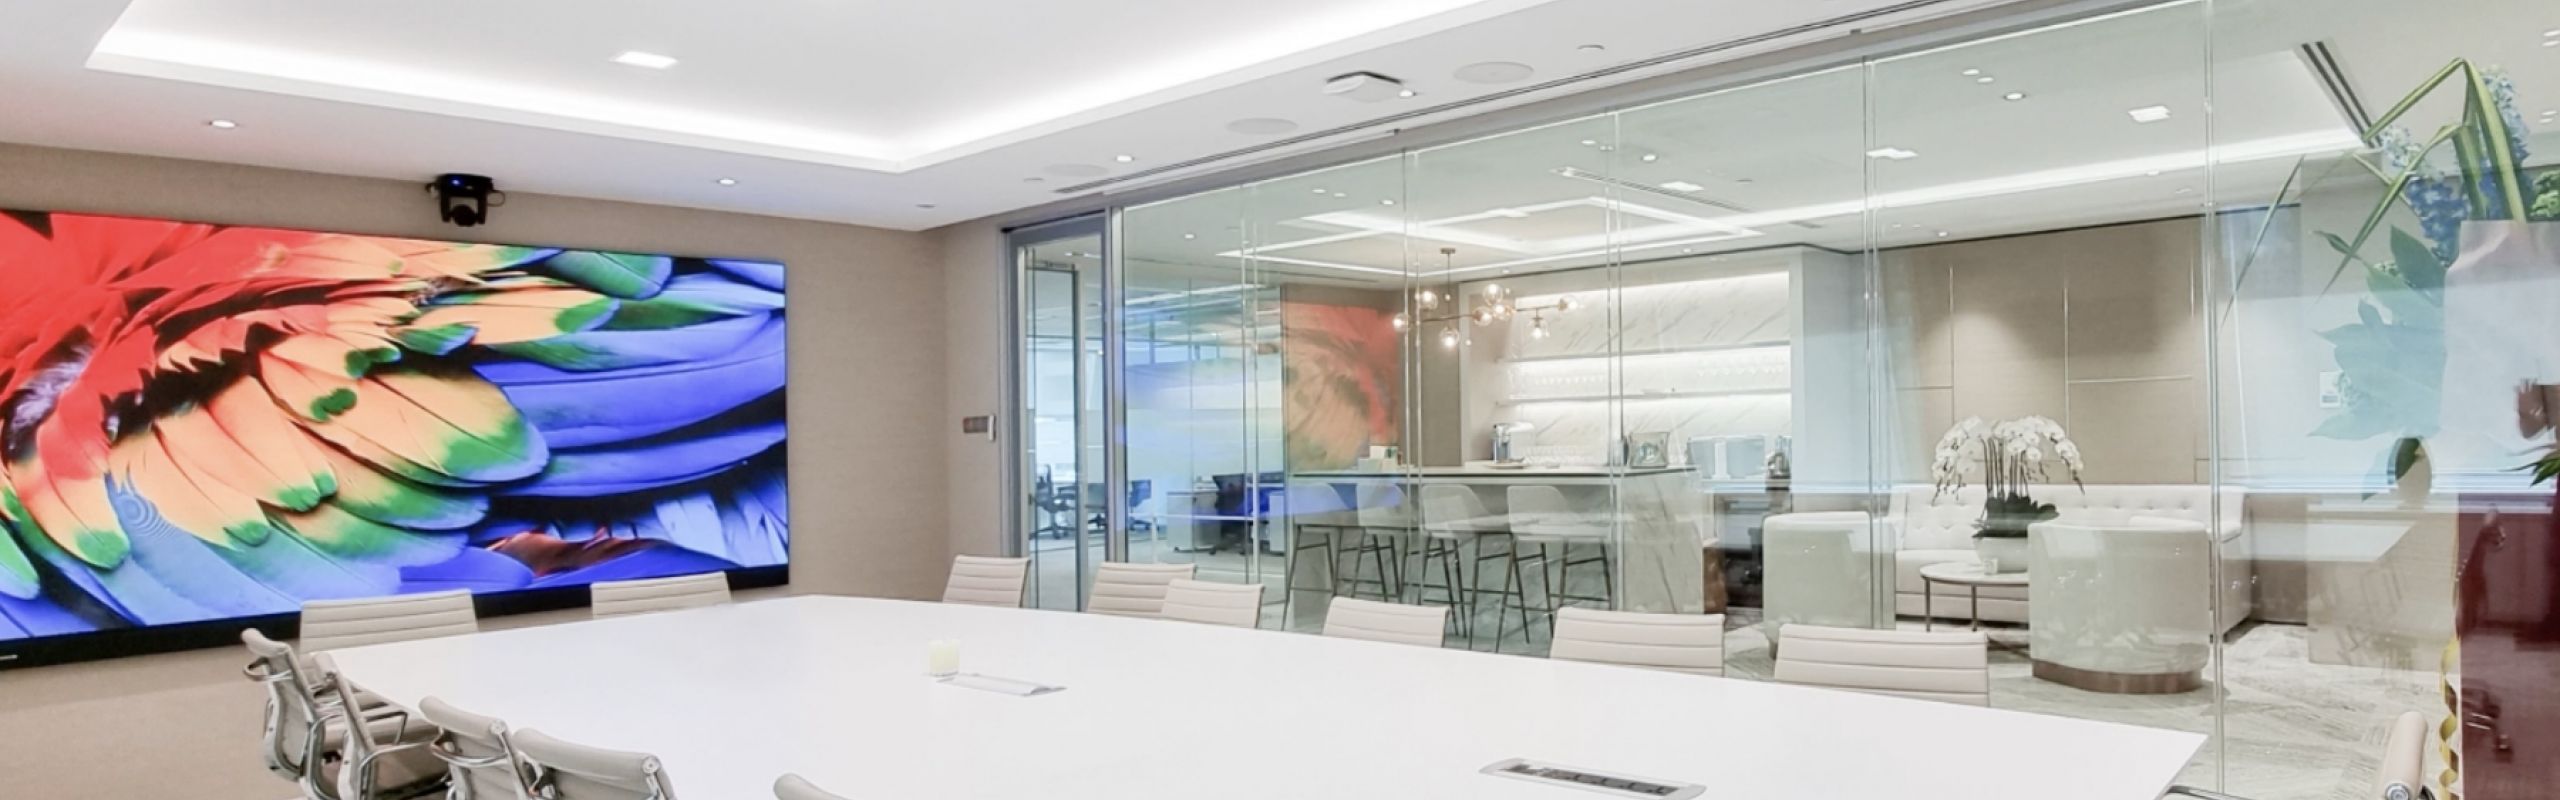 Creating a Light and Airy Interior With Glass Partitioning System